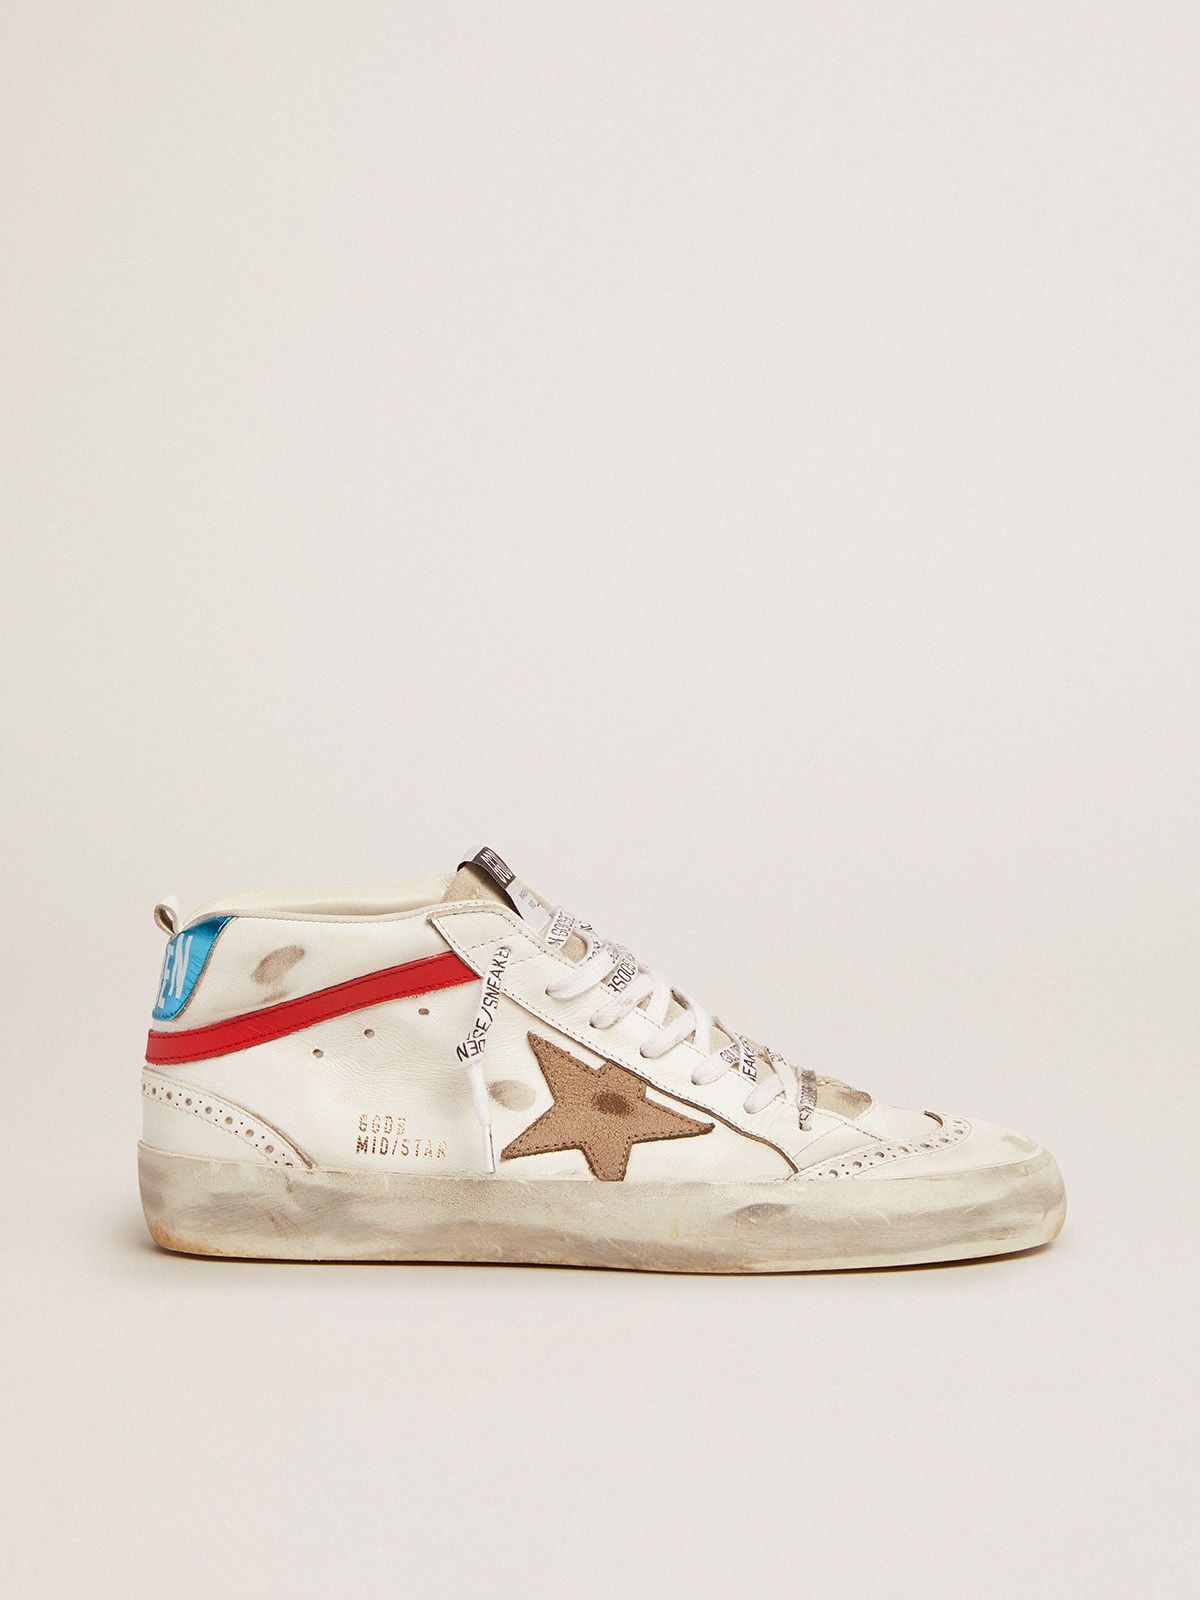 golden goose with leather in metallic Star crackled sneakers and khaki tab Mid star blue heel